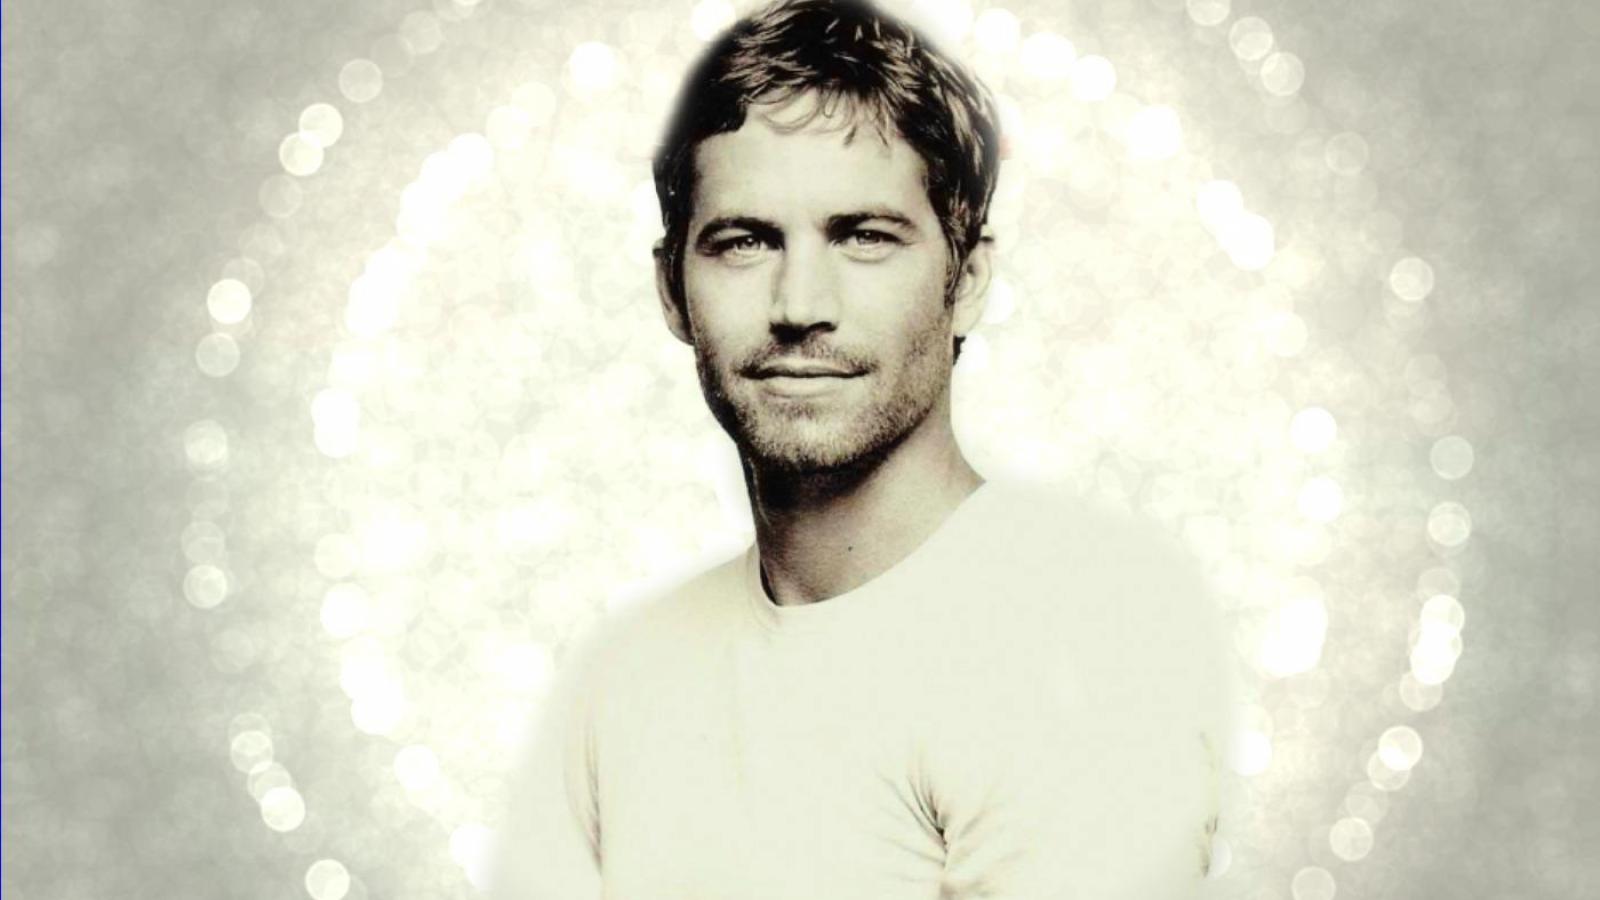 Paul Walker High Quality And Resolution Wallpaper On